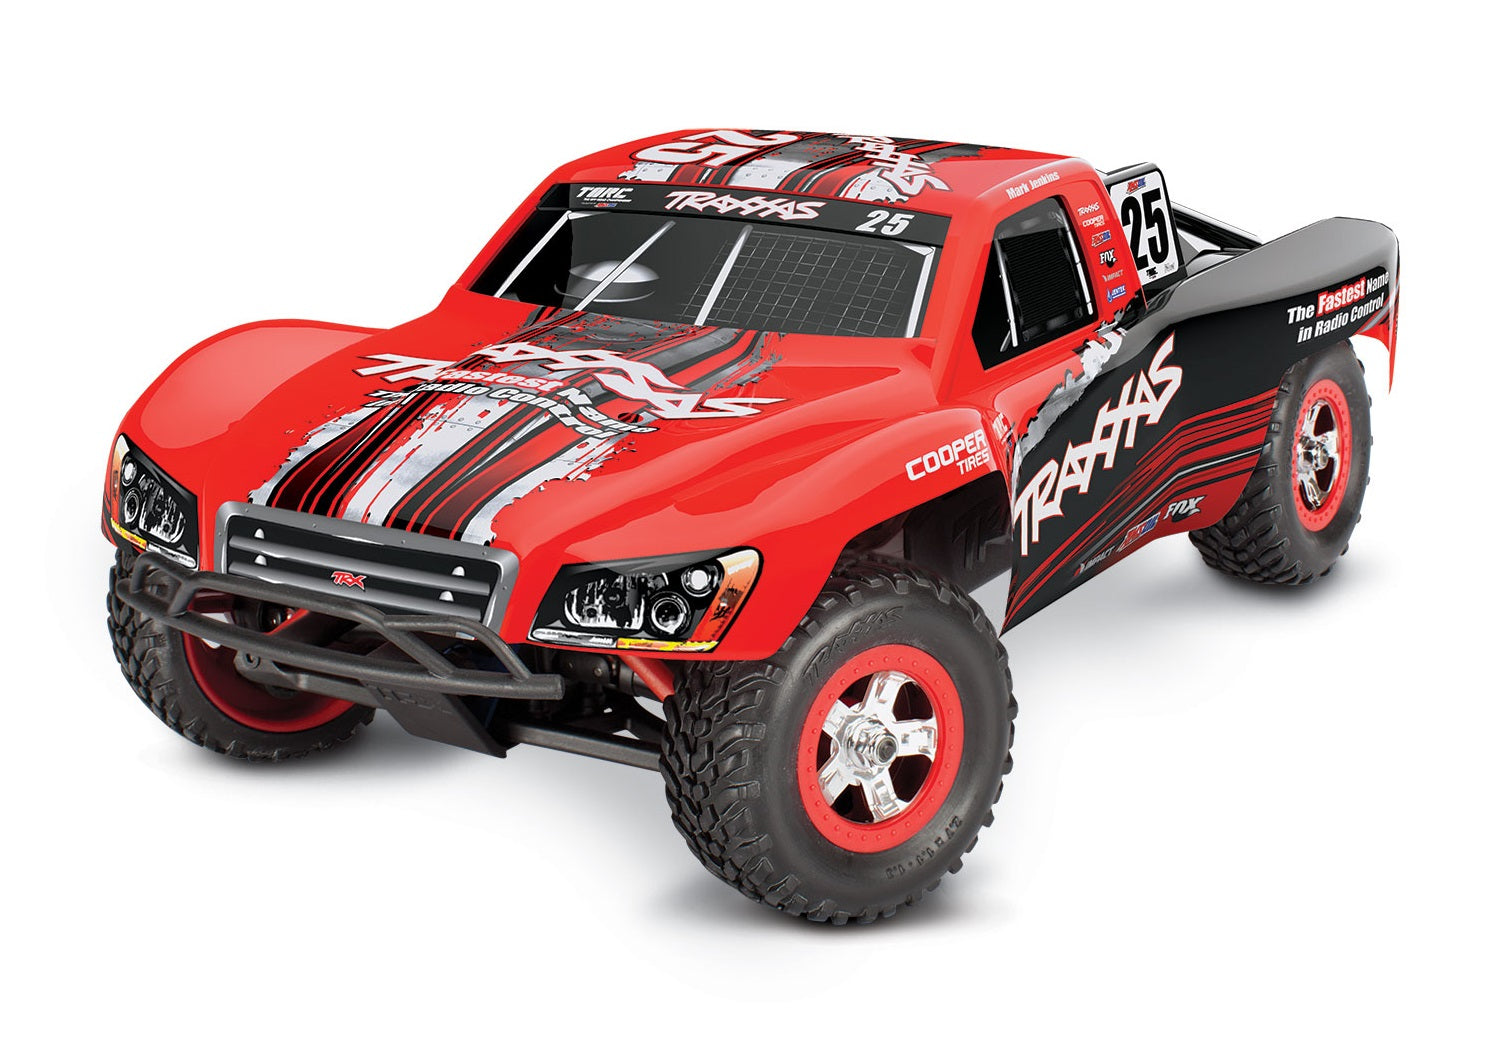 TRAXXAS 1/16 Scale 4WD Electric (MARK) - 70054-1